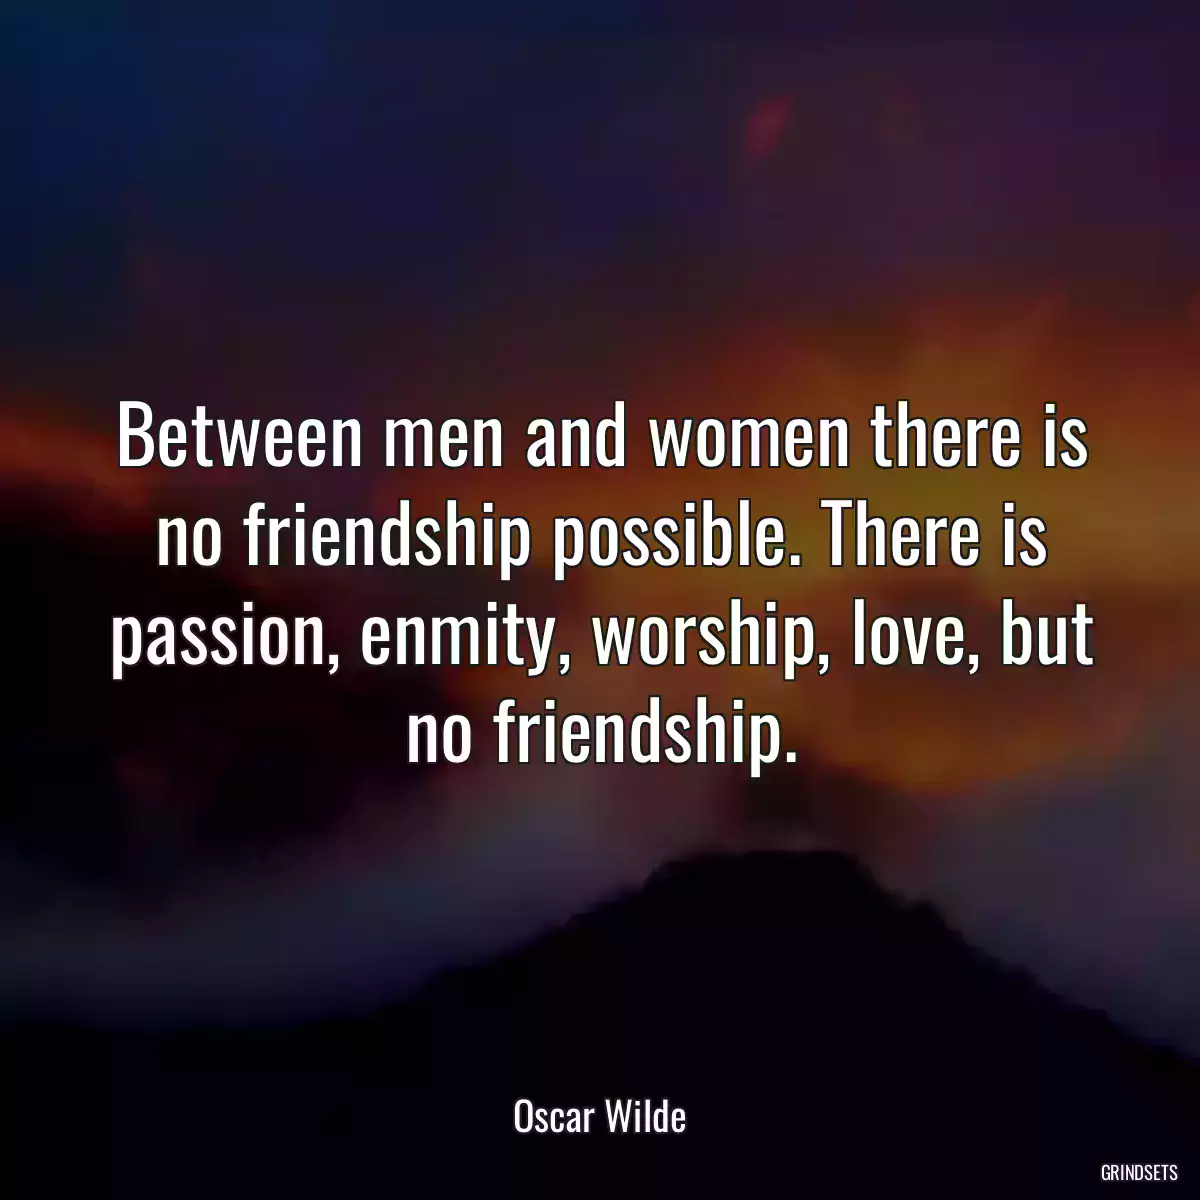 Between men and women there is no friendship possible. There is passion, enmity, worship, love, but no friendship.